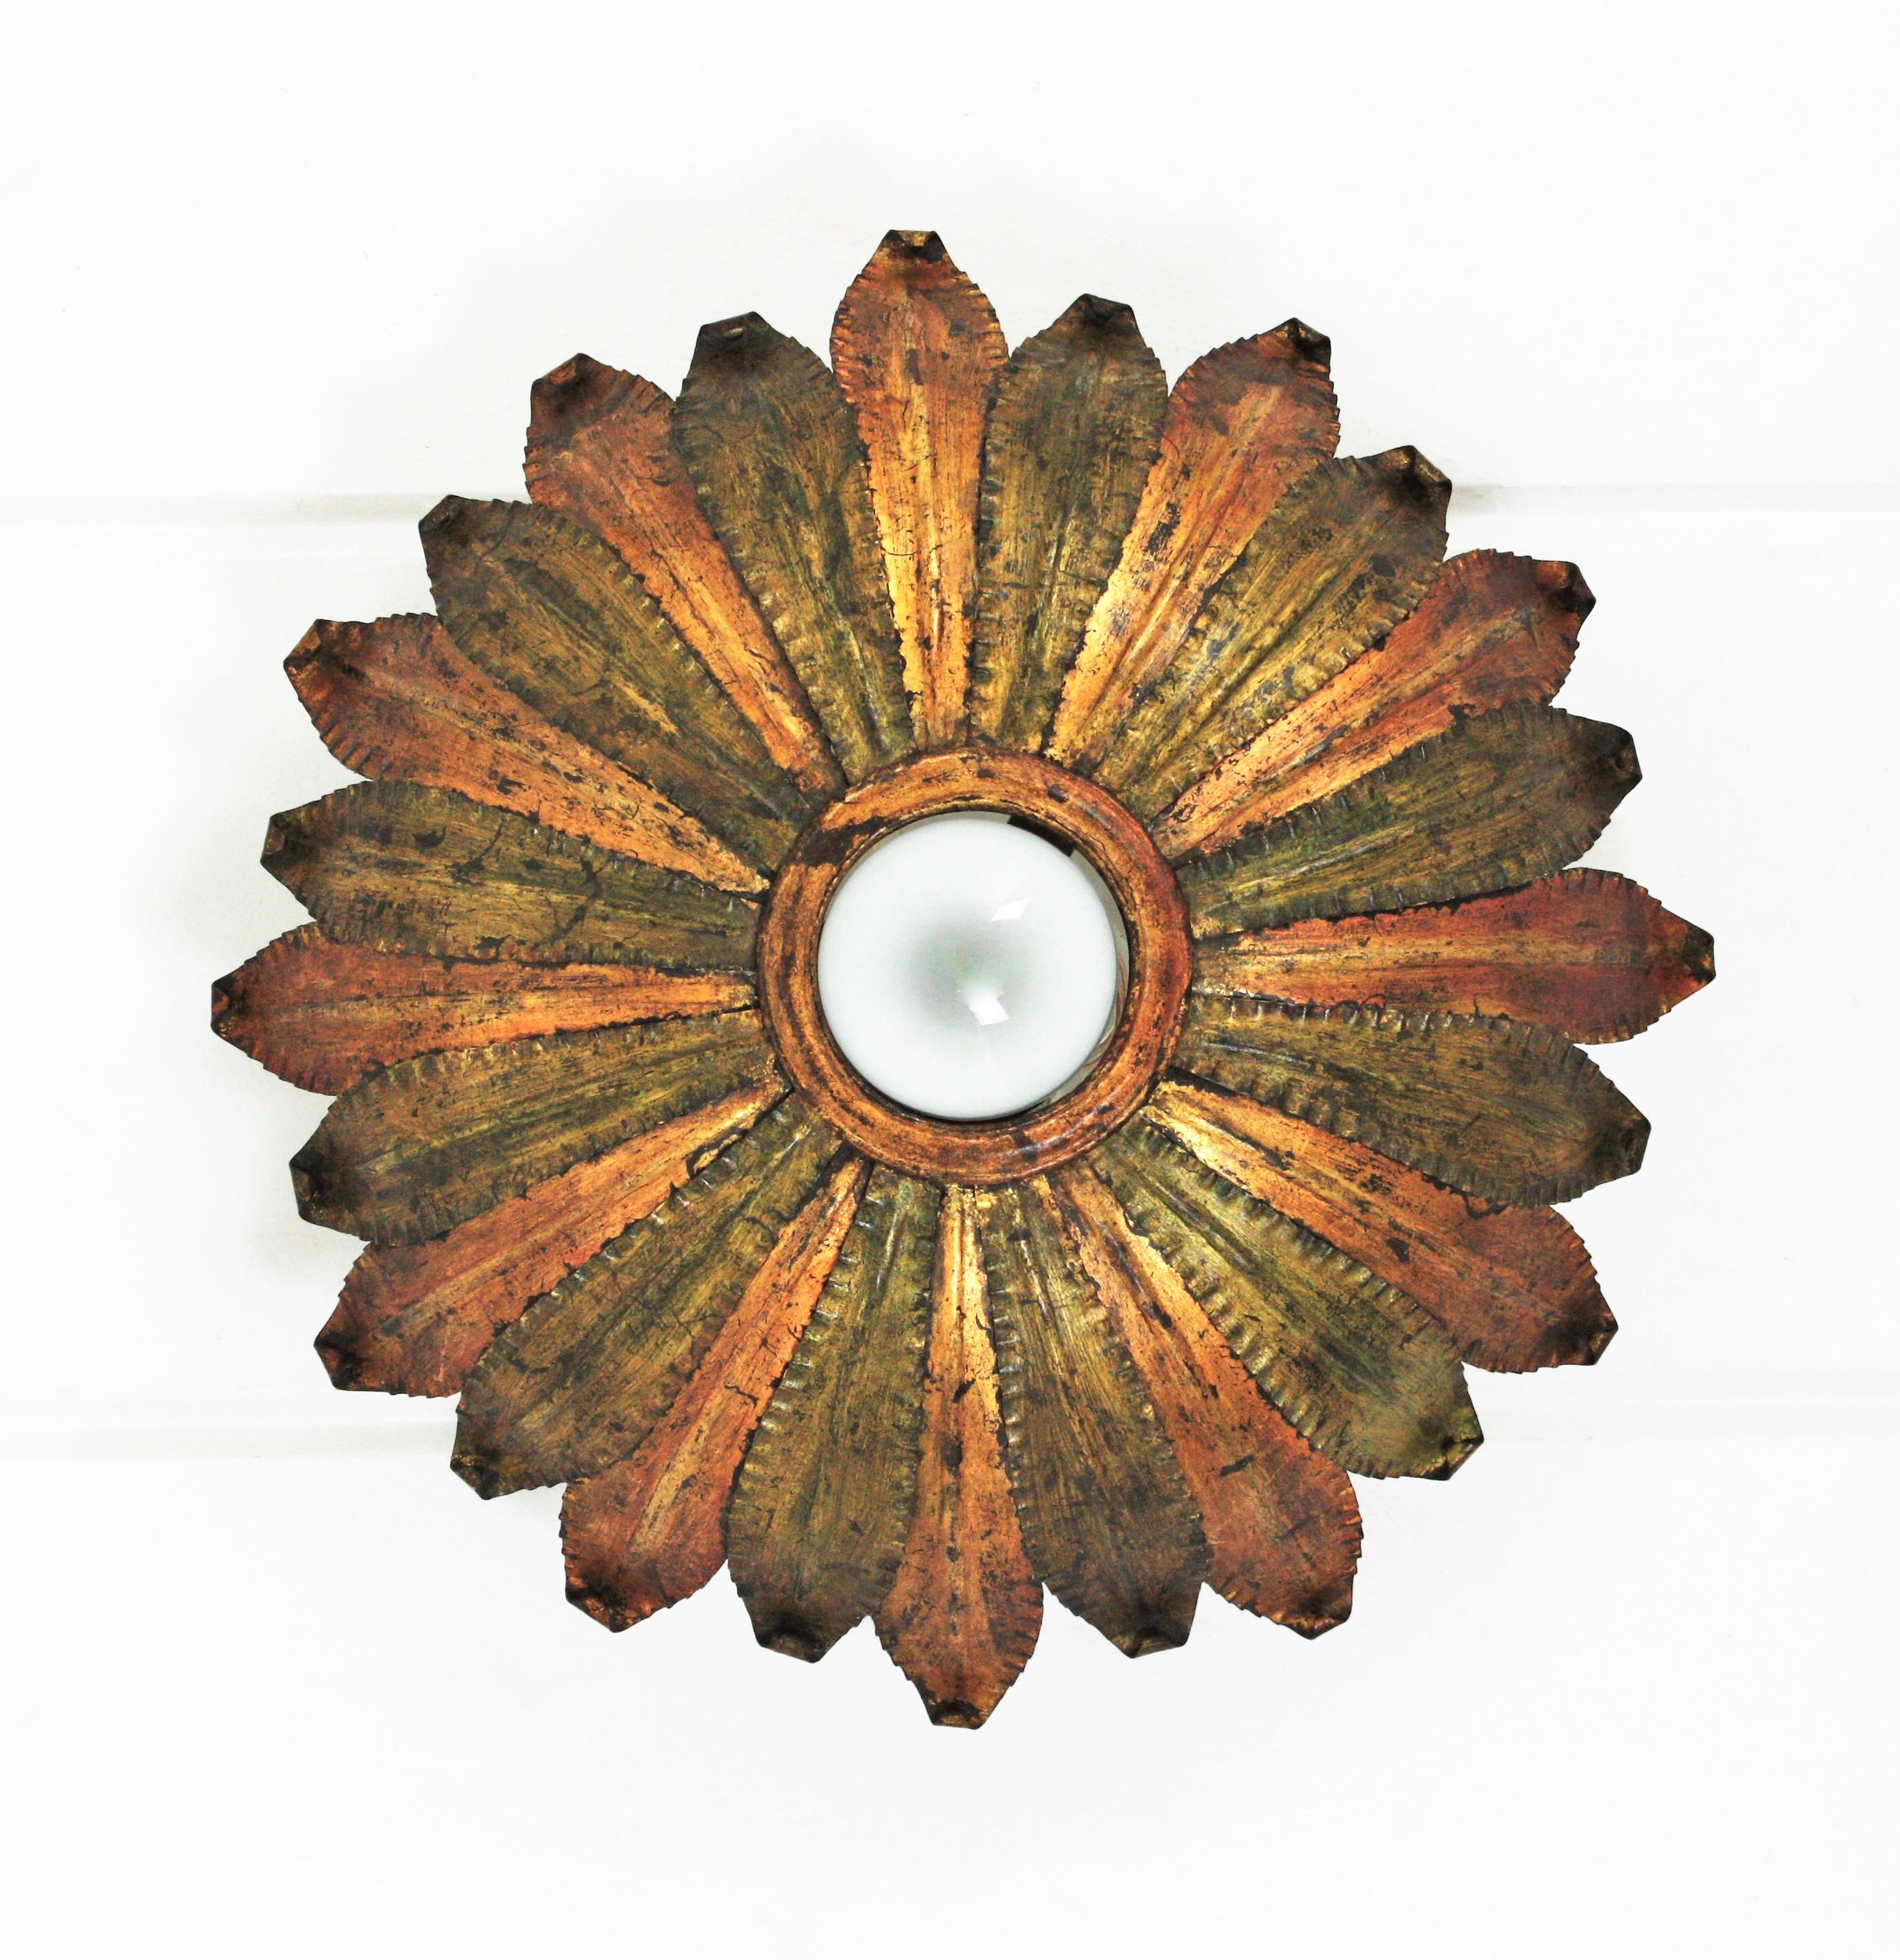 Sunburst light fixture, green and gilt iron, gold leaf, Spain, 1950s.
Eye-catching hand-hammered iron sunburst light fixture with a highly decorative original patina in gold leaf gilding and green color. 
This pieces a frame of alternating iron